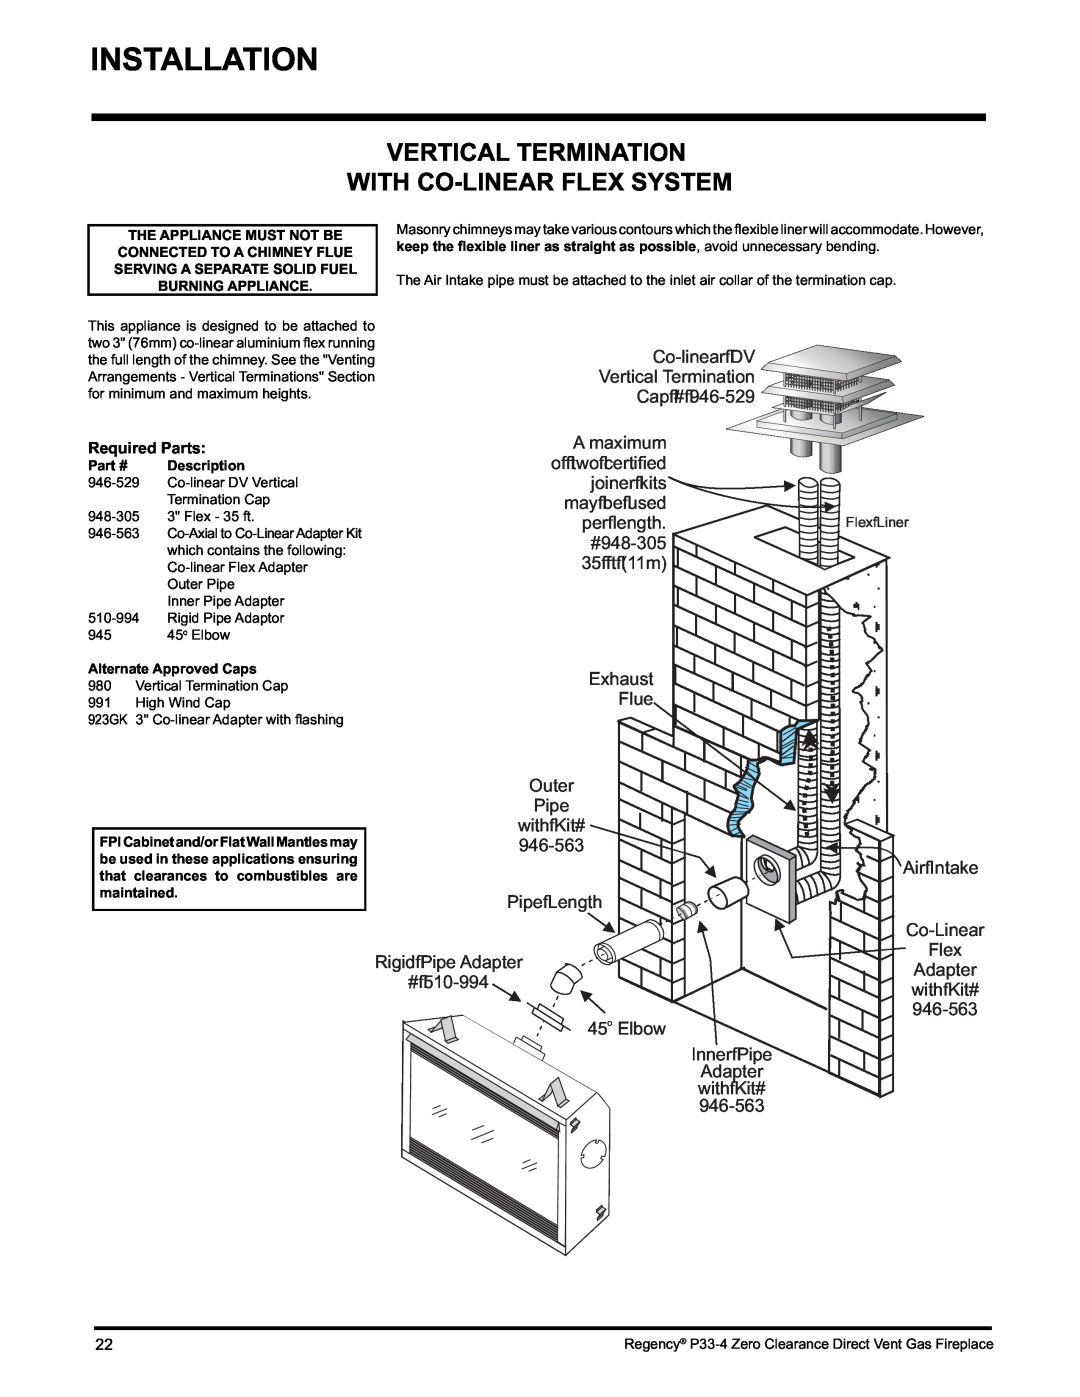 Regency P33-NG4 Vertical Termination With Co-Linearflex System, Co-linearDV Vertical Termination Cap #, Exhaust Flue 